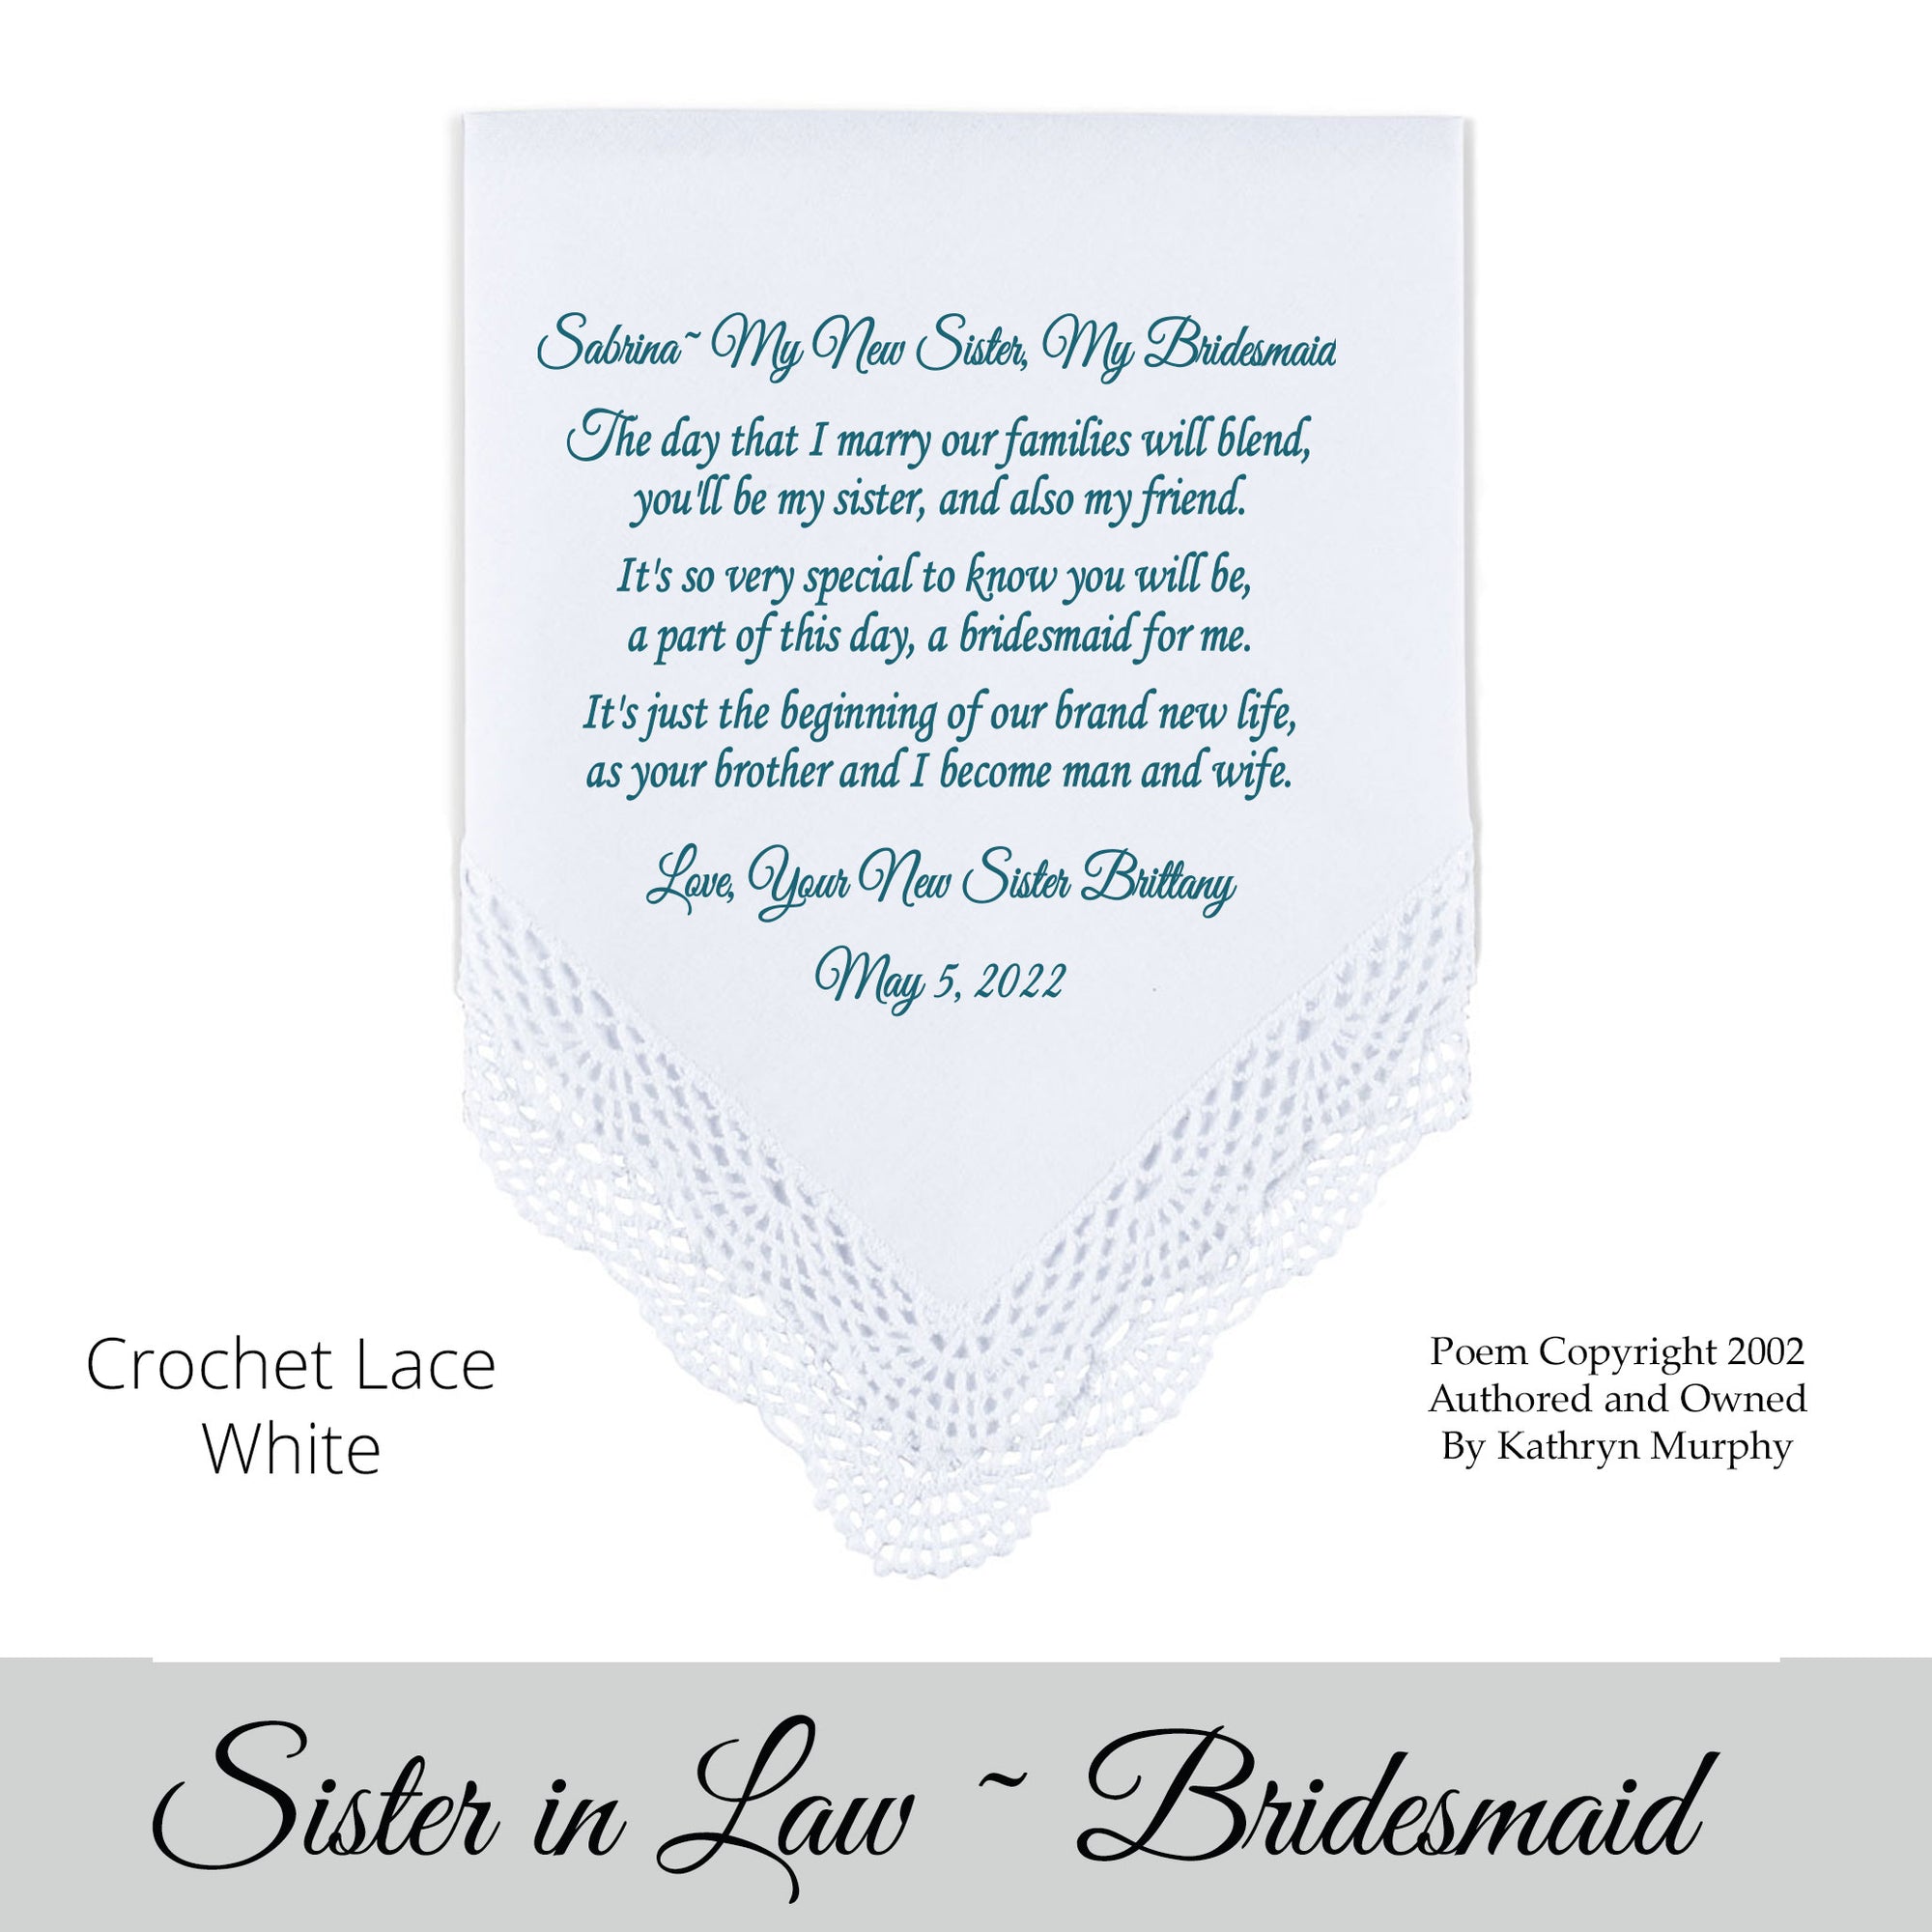 Gift for the sister in law bridesmaid poem printed wedding hankie